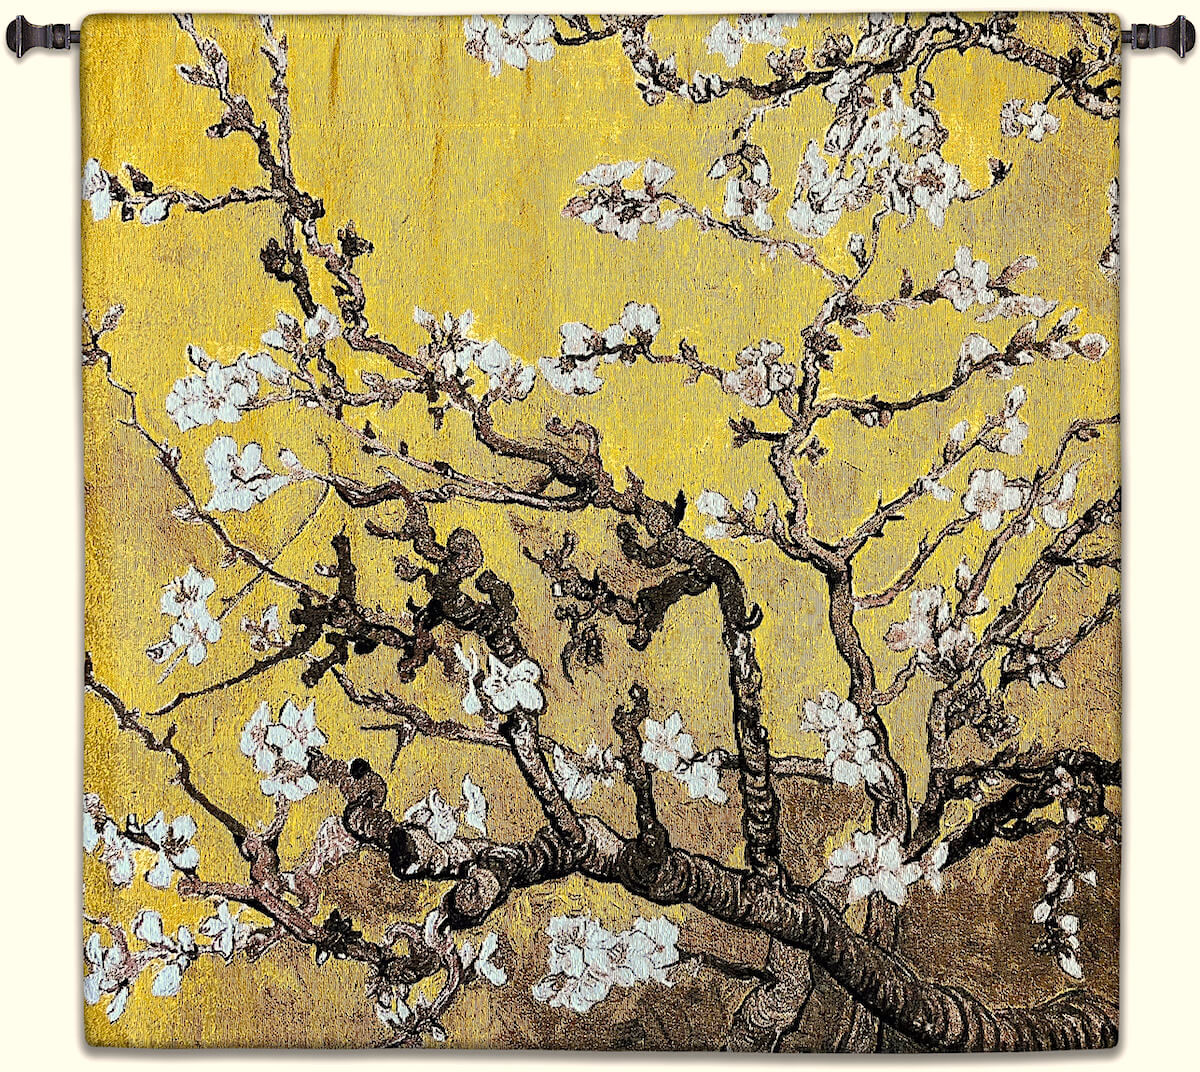 Almond Blossom Yellow Square Wall Tapestry Abstract, Almond, Art, S, Blossom, Yellow, Botanical, Carolina, USAwoven, Cotton, Floral, Flower, Flowers, Gogh, Gray, Grey, Hanging, Oriental, Pedals, Purple, Seller, Square, Tapestries, Tapestry, Top50, Tree, Van, Wall, White, Woven, Woven, Bestseller, tapestries, tapestrys, hangings, and, the, exclusive